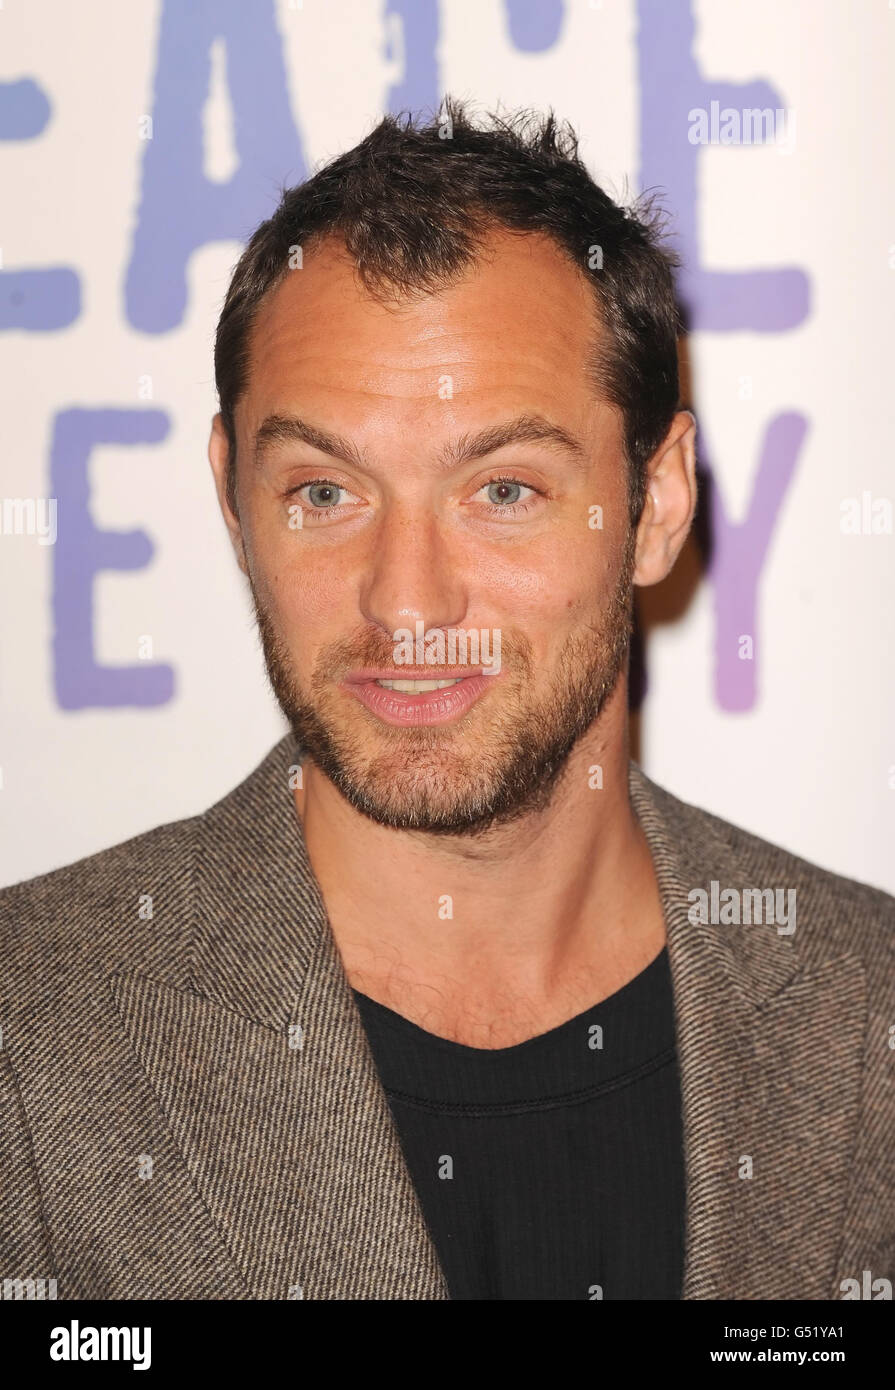 Jude Law at the launch of Peace One Day's Global Truce 'Reducing Domestic Violence' campaign, at the Grosvenor House hotel, in central London. Stock Photo